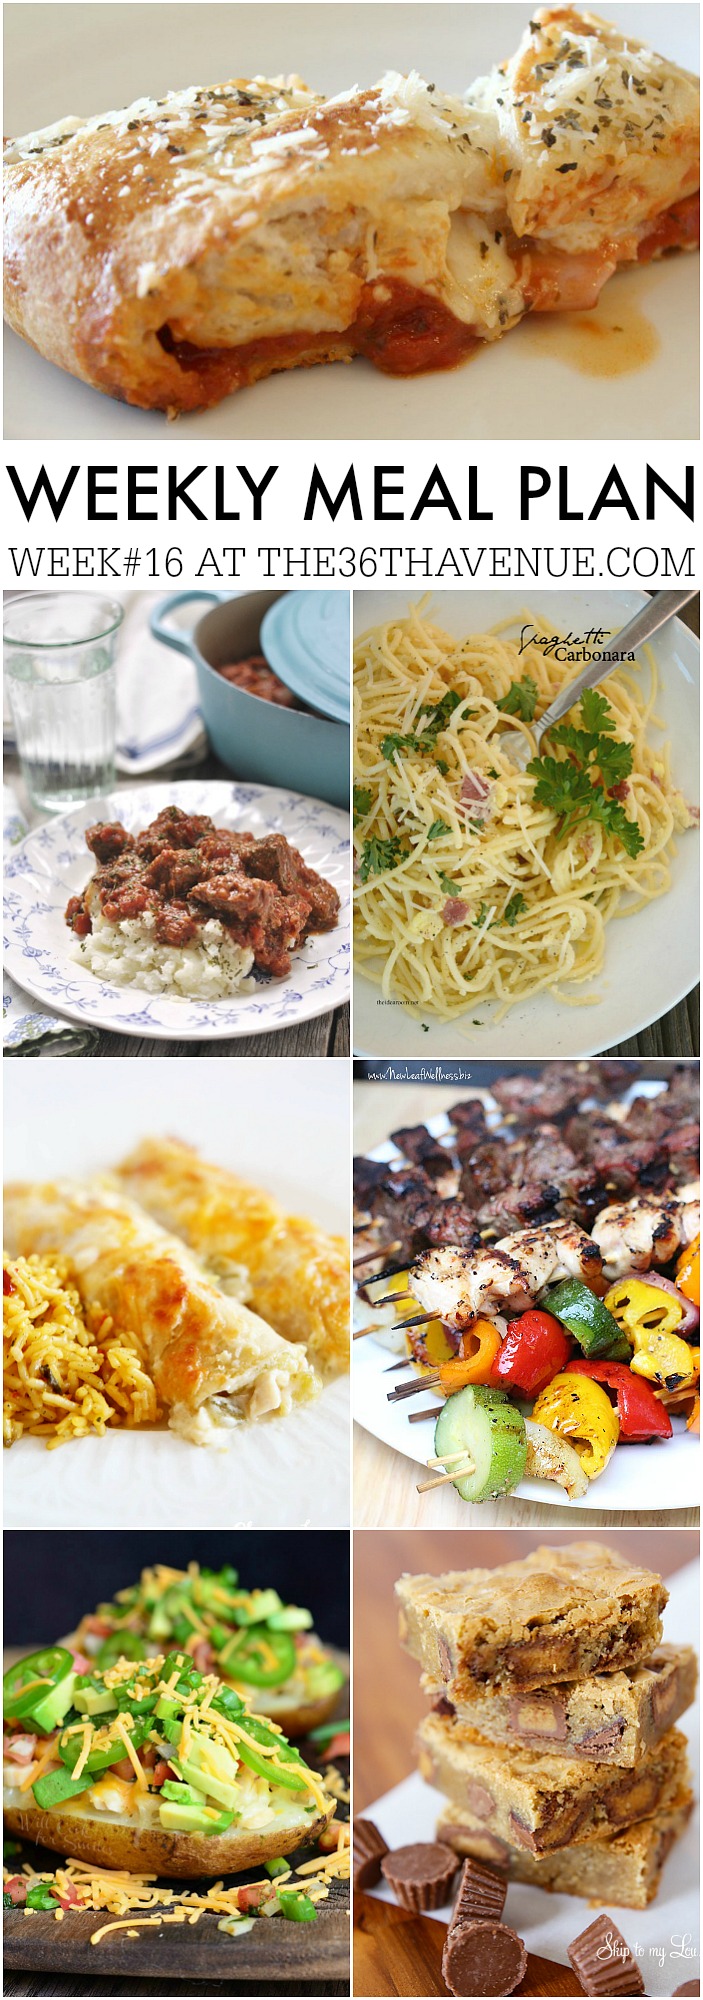 Weekly Meal Plan - Main dishes and dessert recipe for the entire week. So yummy! 